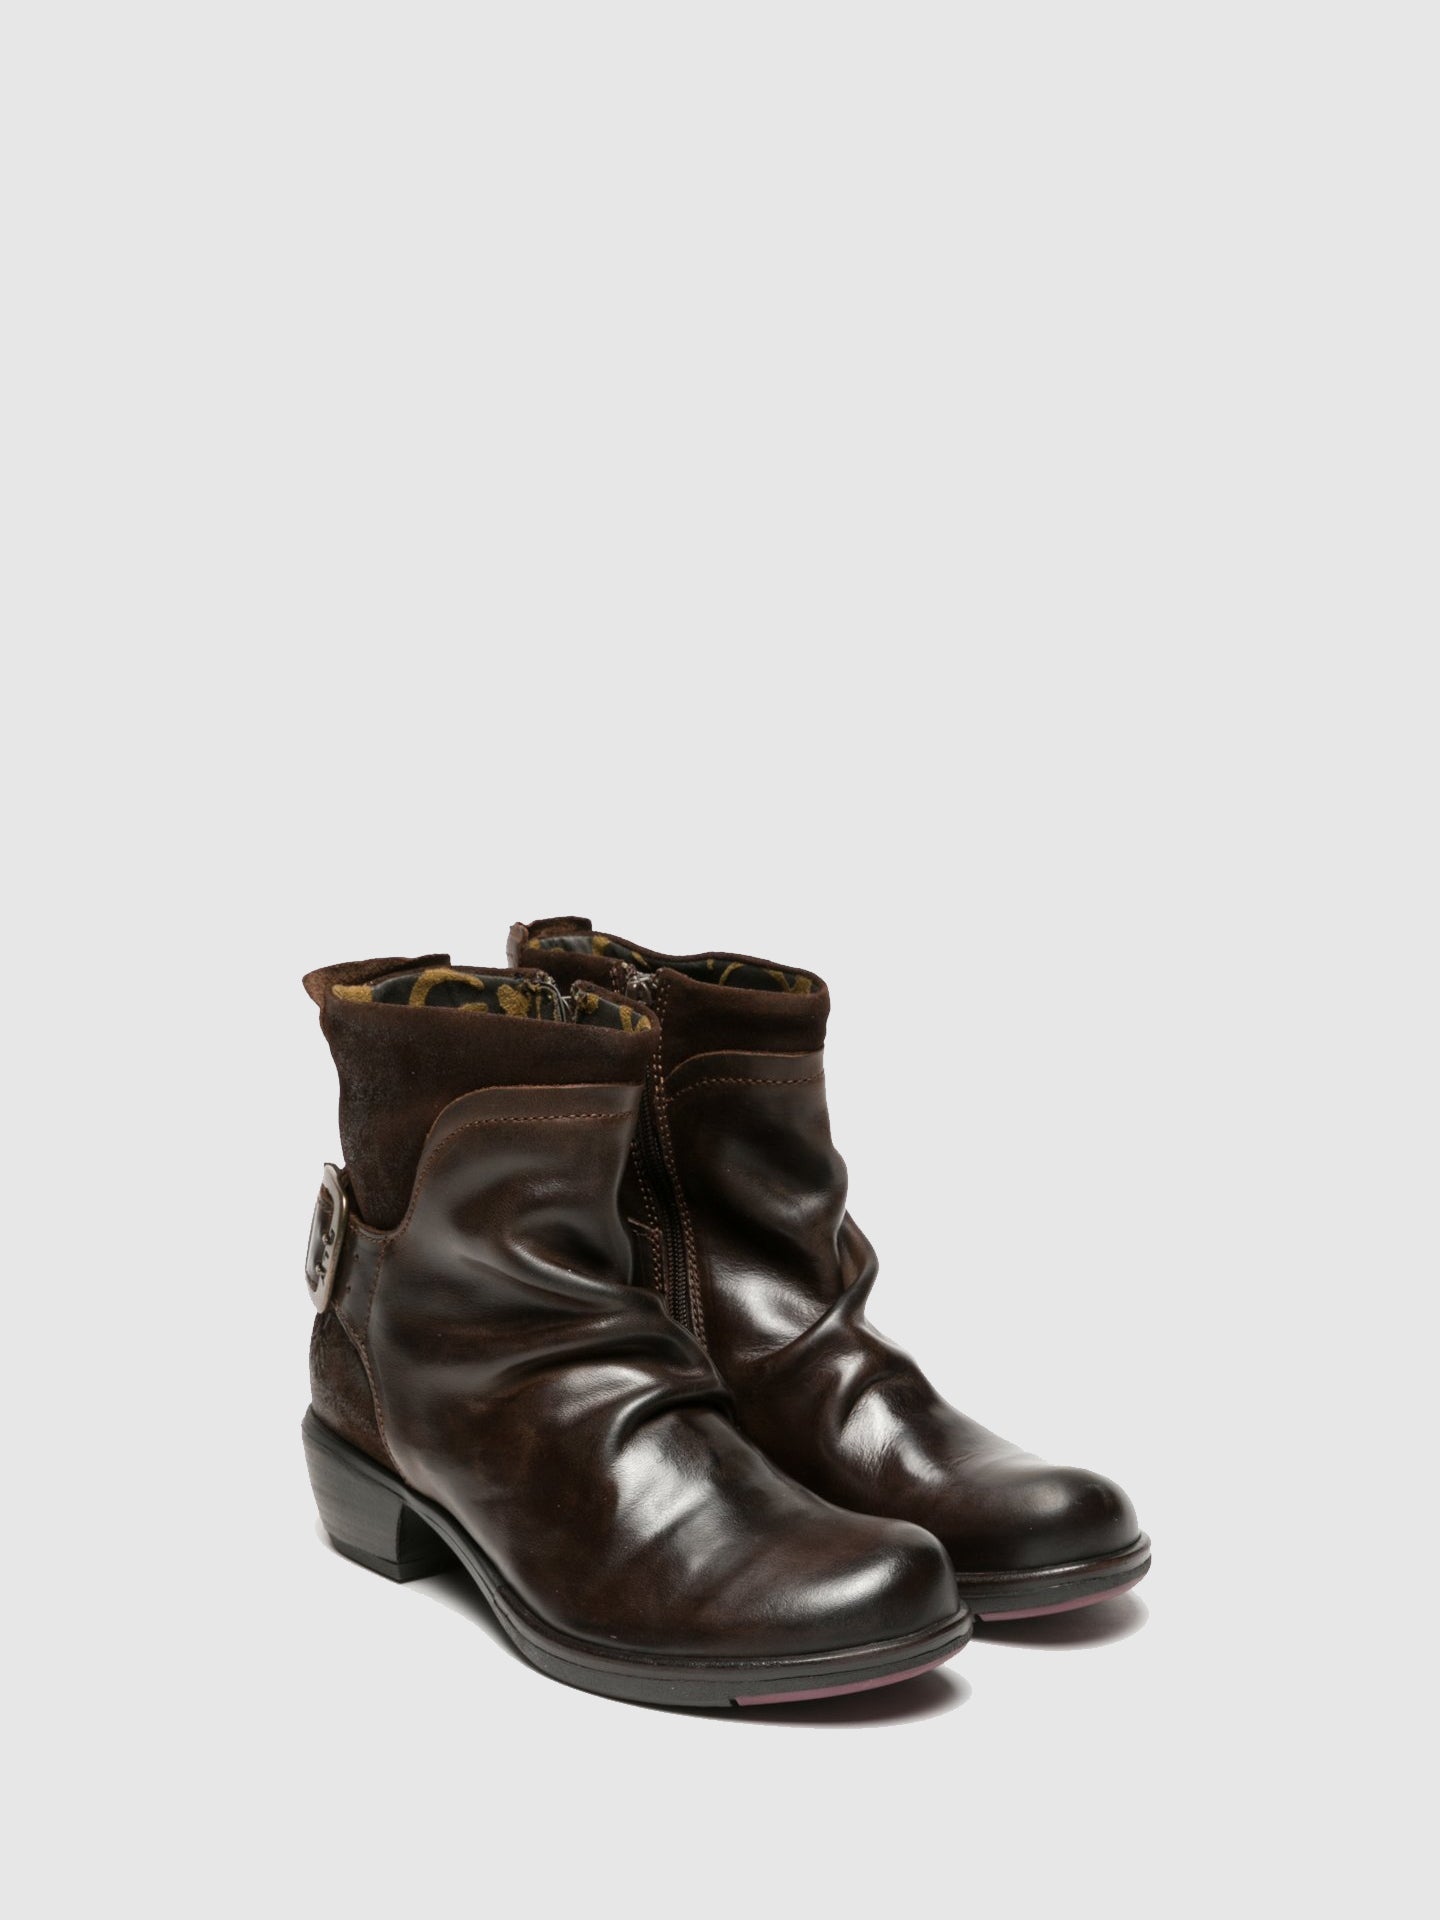 Fly London Sienna Buckle Ankle Boots